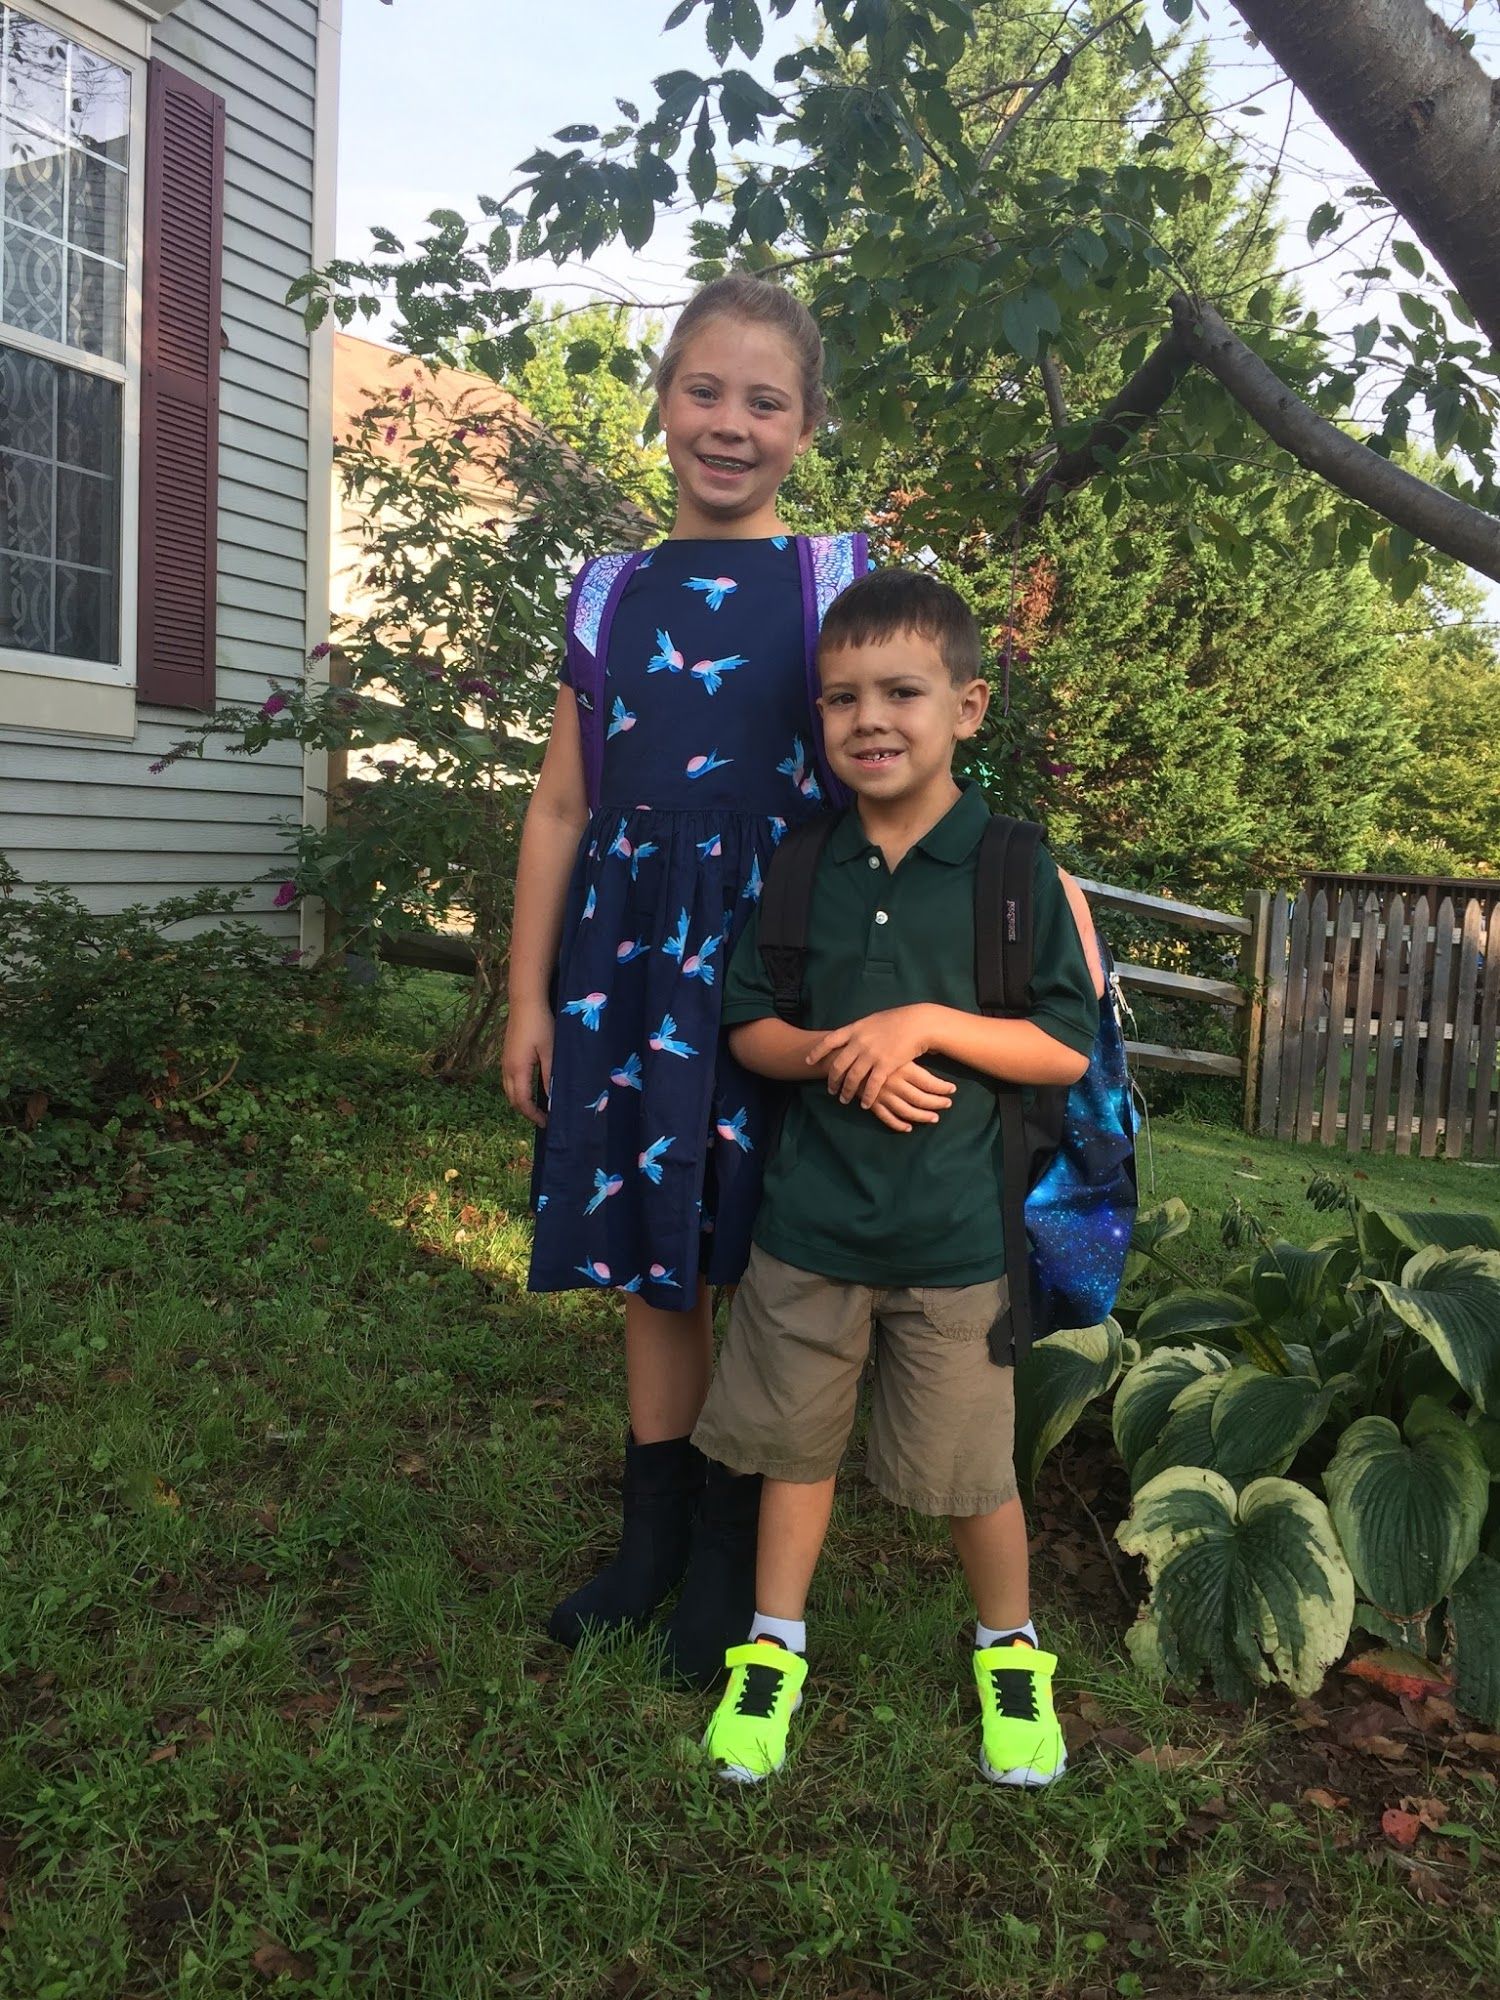  Third grade and first grade, here they come! 